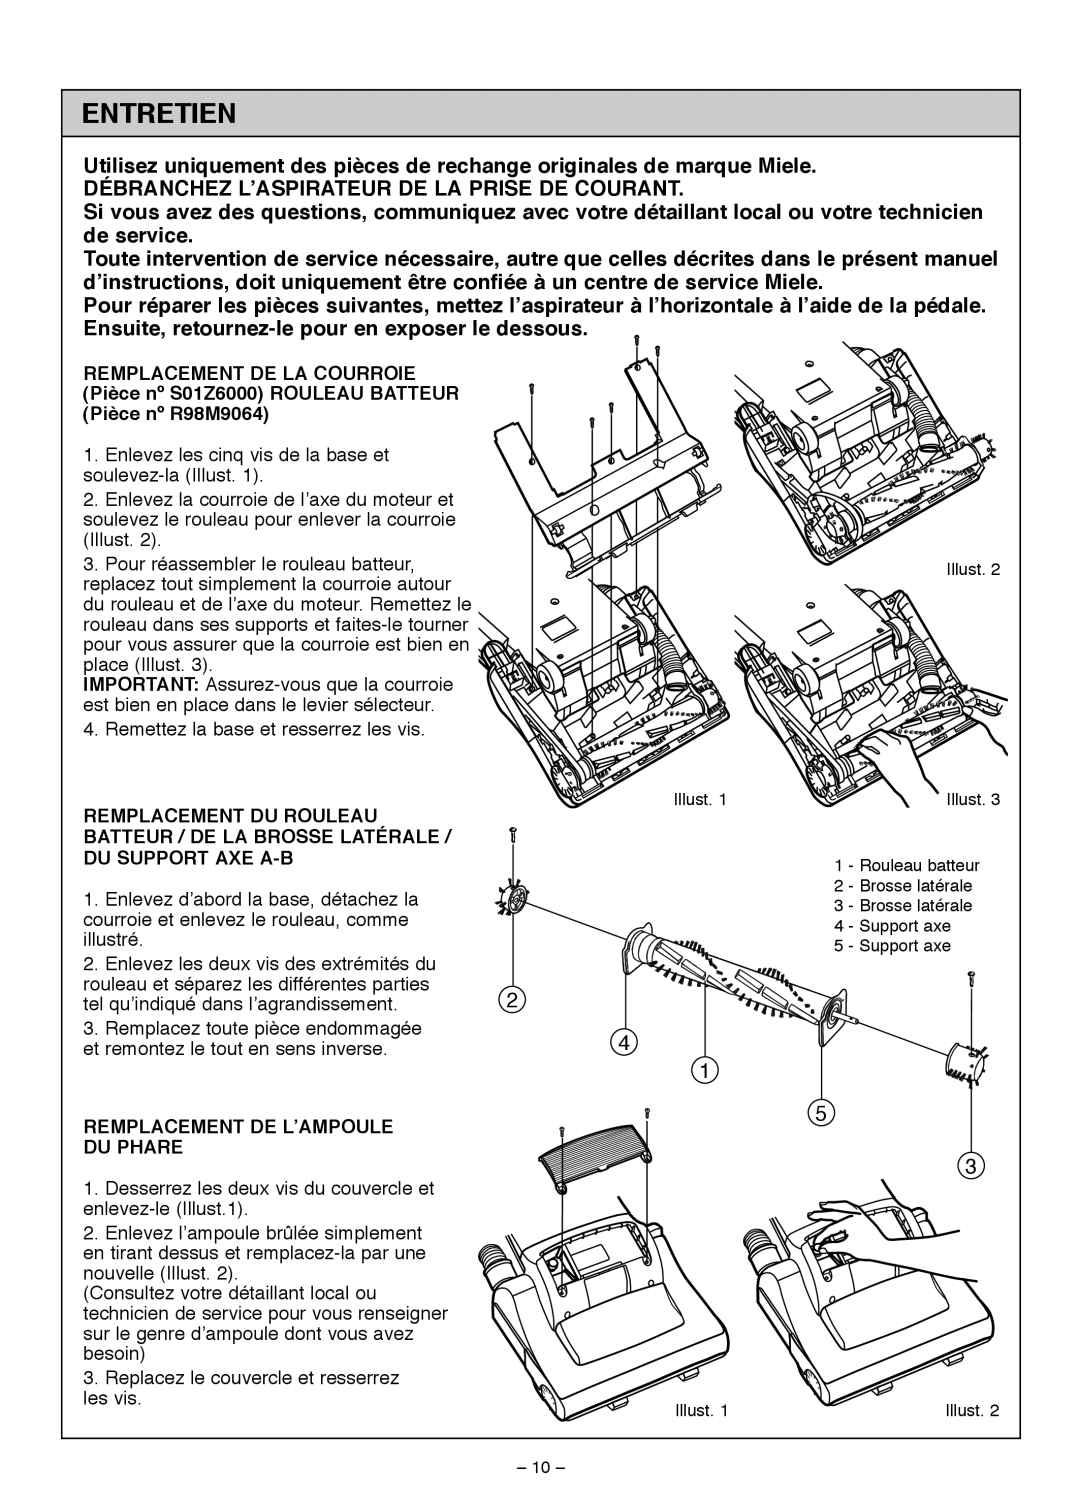 Miele S185 important safety instructions Entretien 